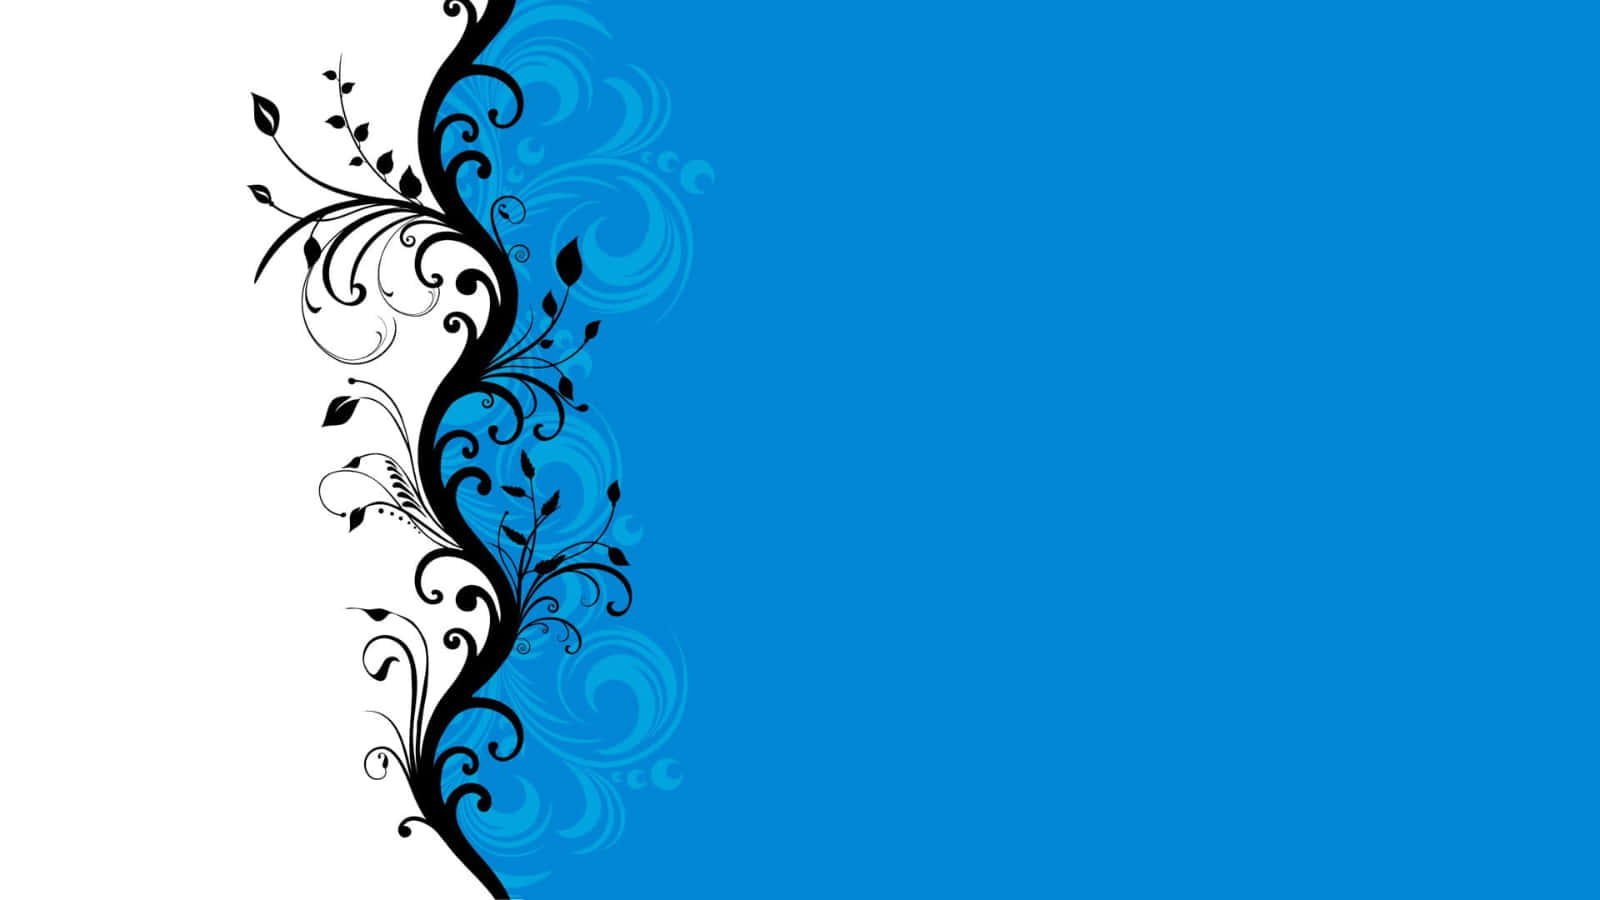 A Blue Background With Black And White Floral Designs